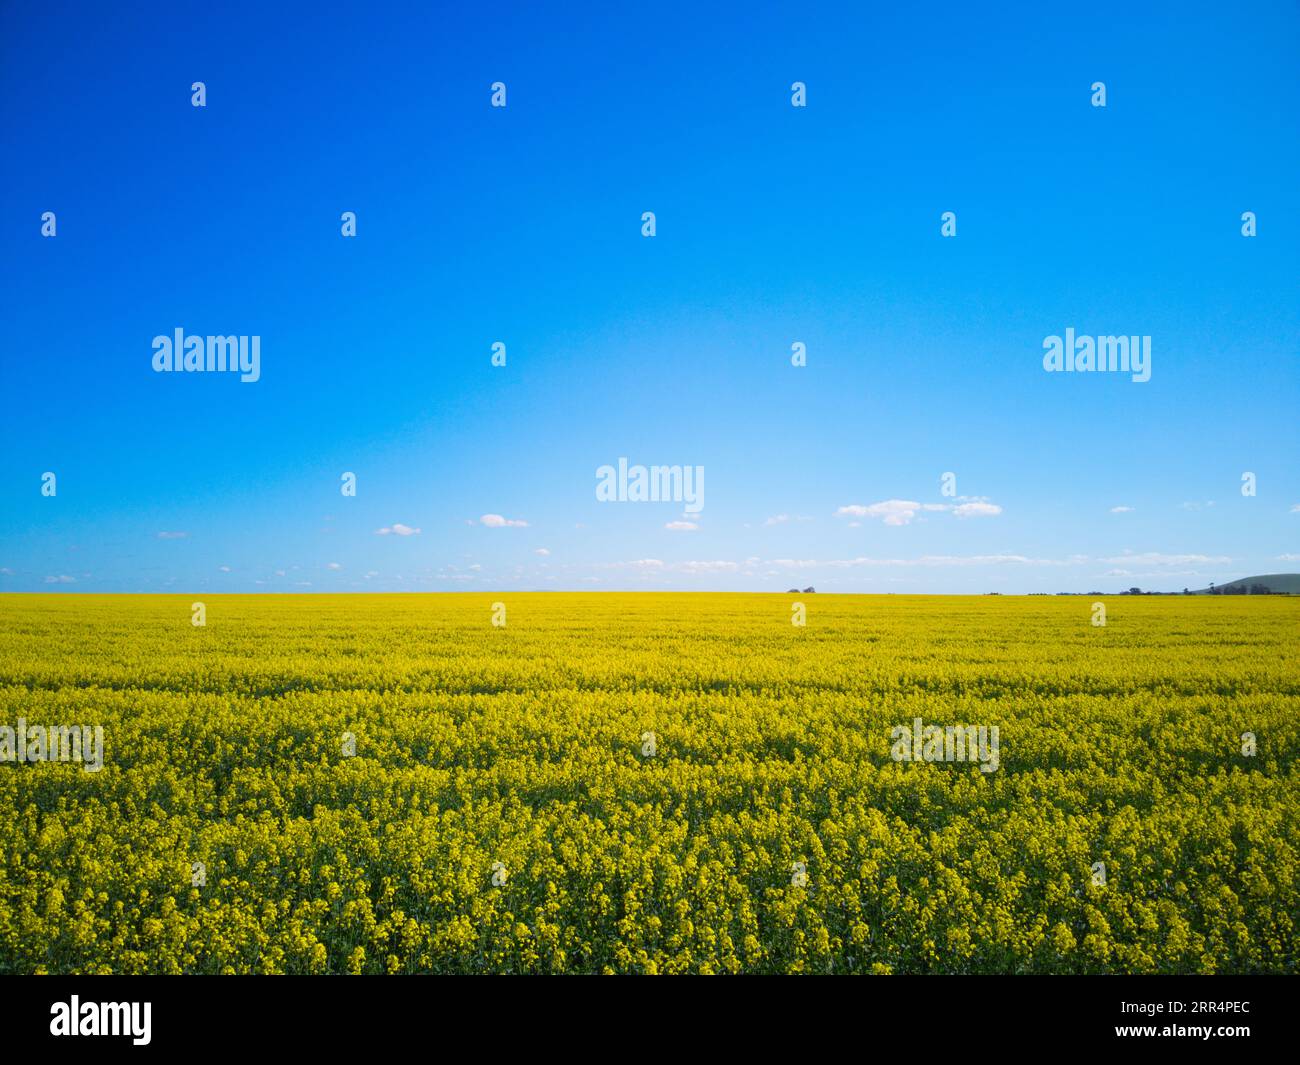 A canola field in Victoria Australia showing yellow flowers and a blue sky background, in an agricultural setting. Stock Photo